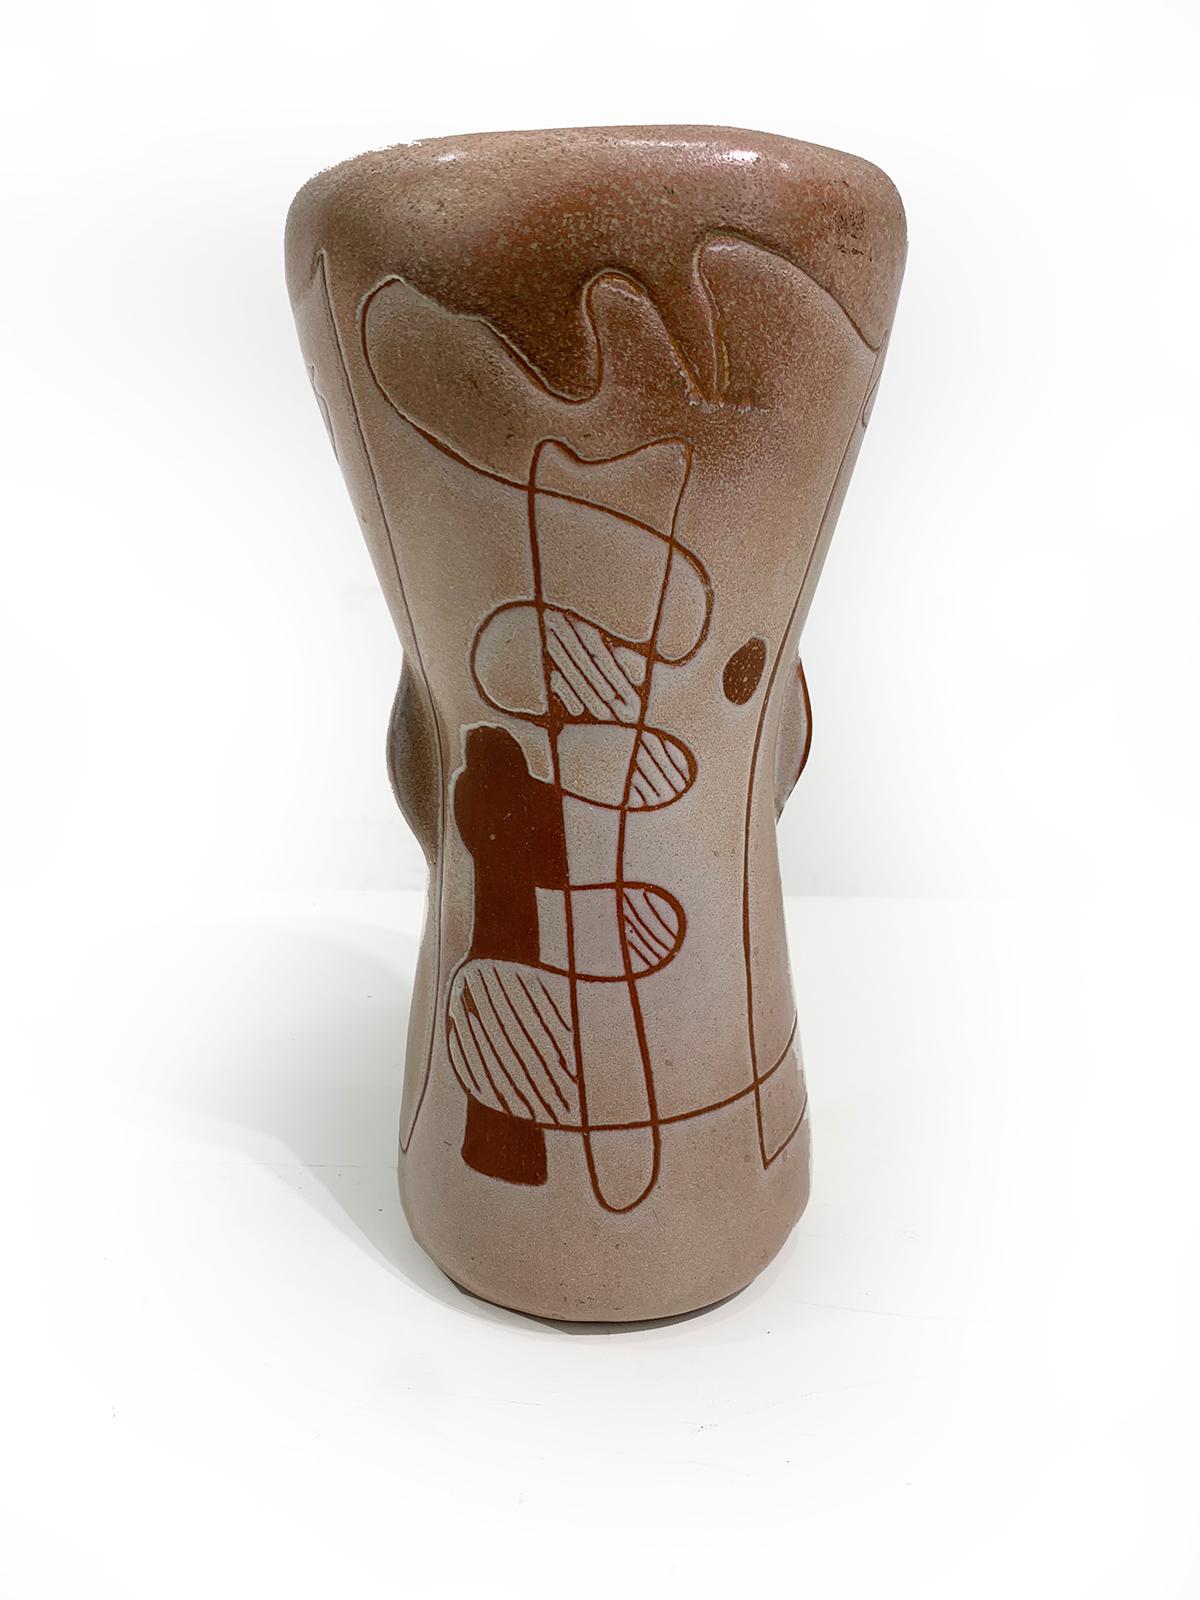 Unique Mid-century ceramic vase, with abstract design and earth colors giving it a rich vintage appeal,  having the signature of the artist on the underside, circa 1960.
